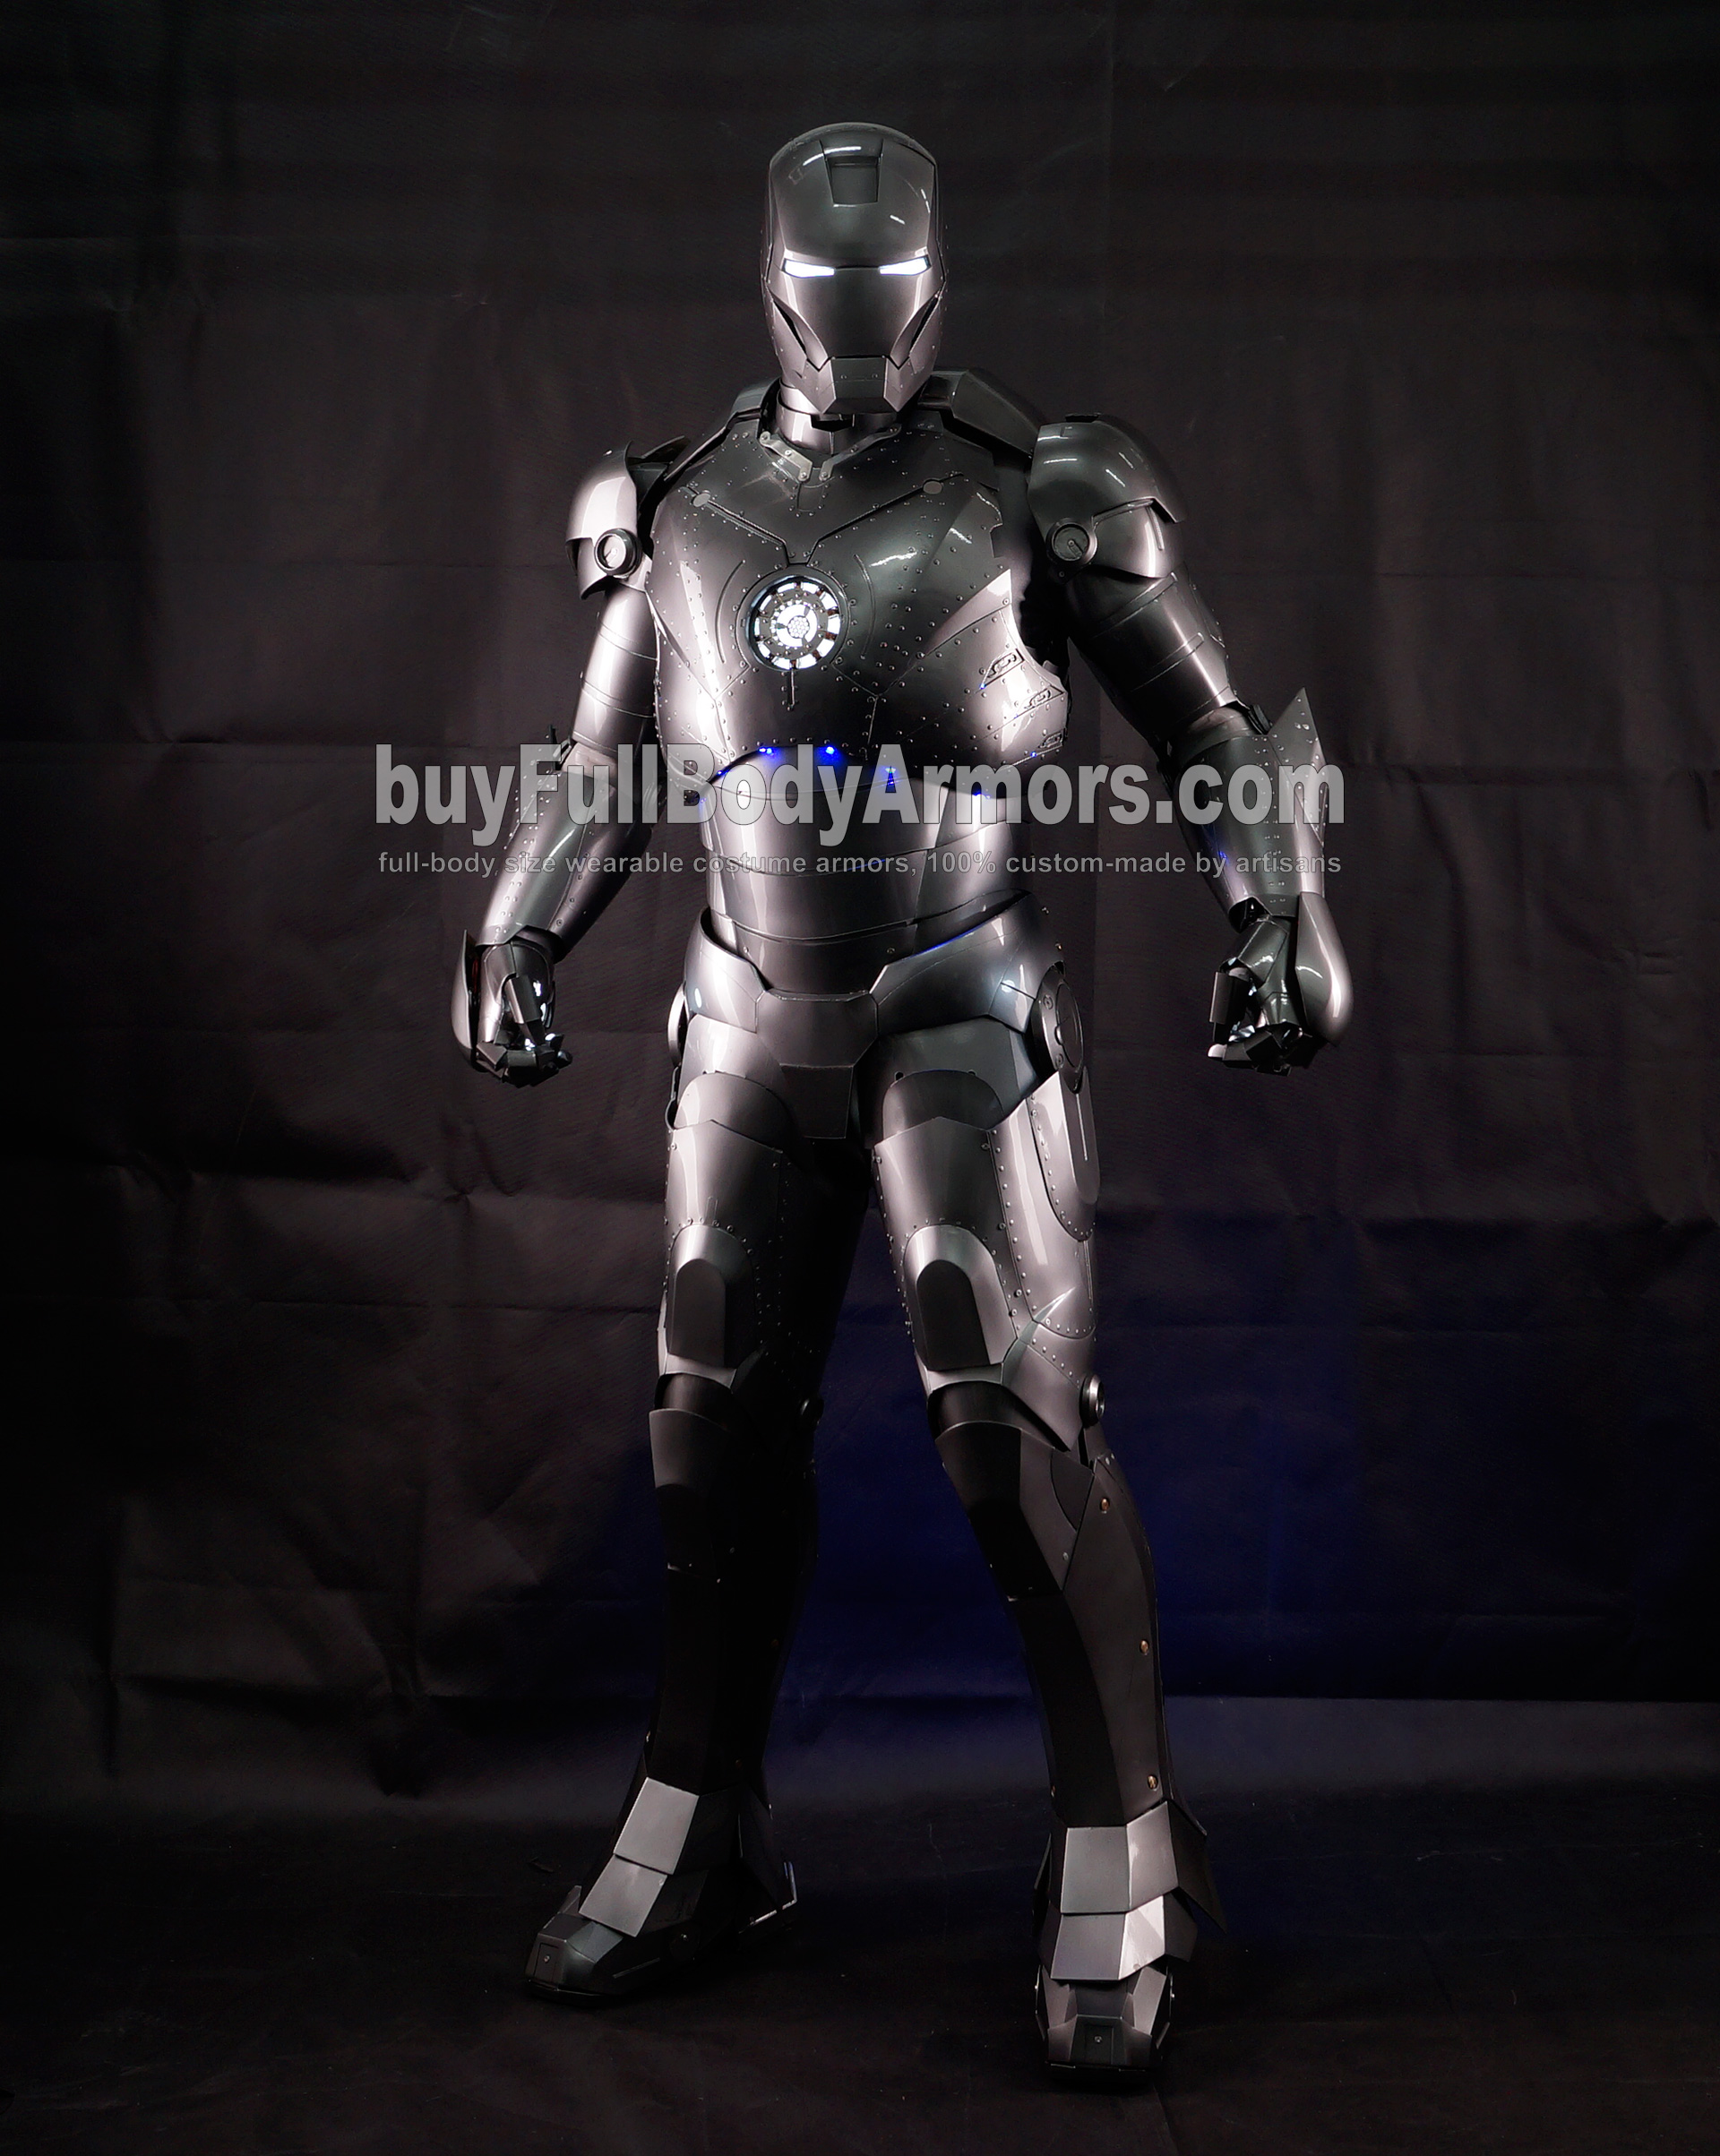 High Definition Photos of the Wearable Iron Man Mark 2 II Armor Costume Suit 2